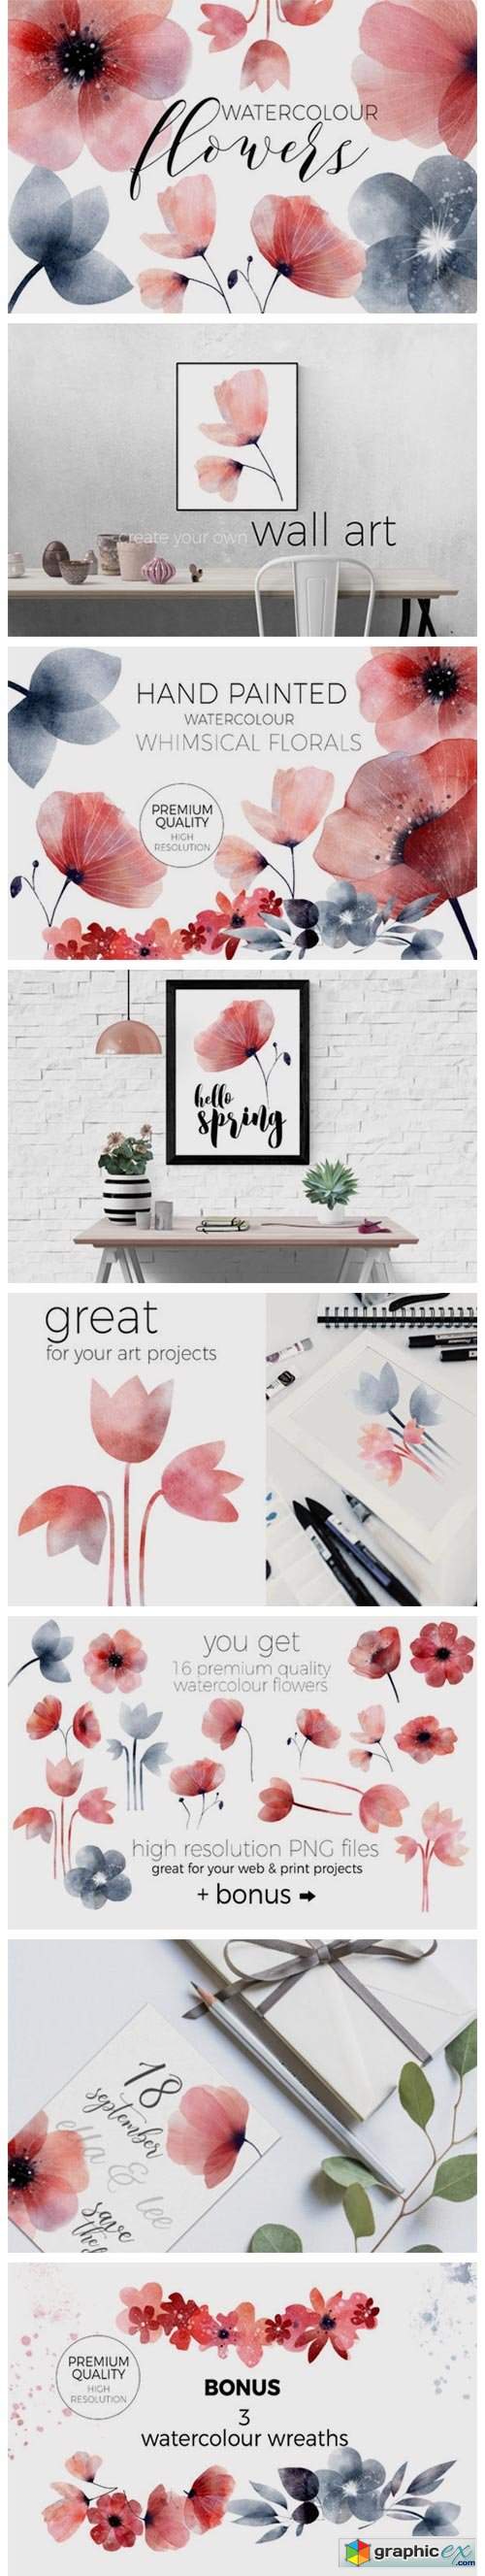  Whimsical Spring Florals Watercolor 